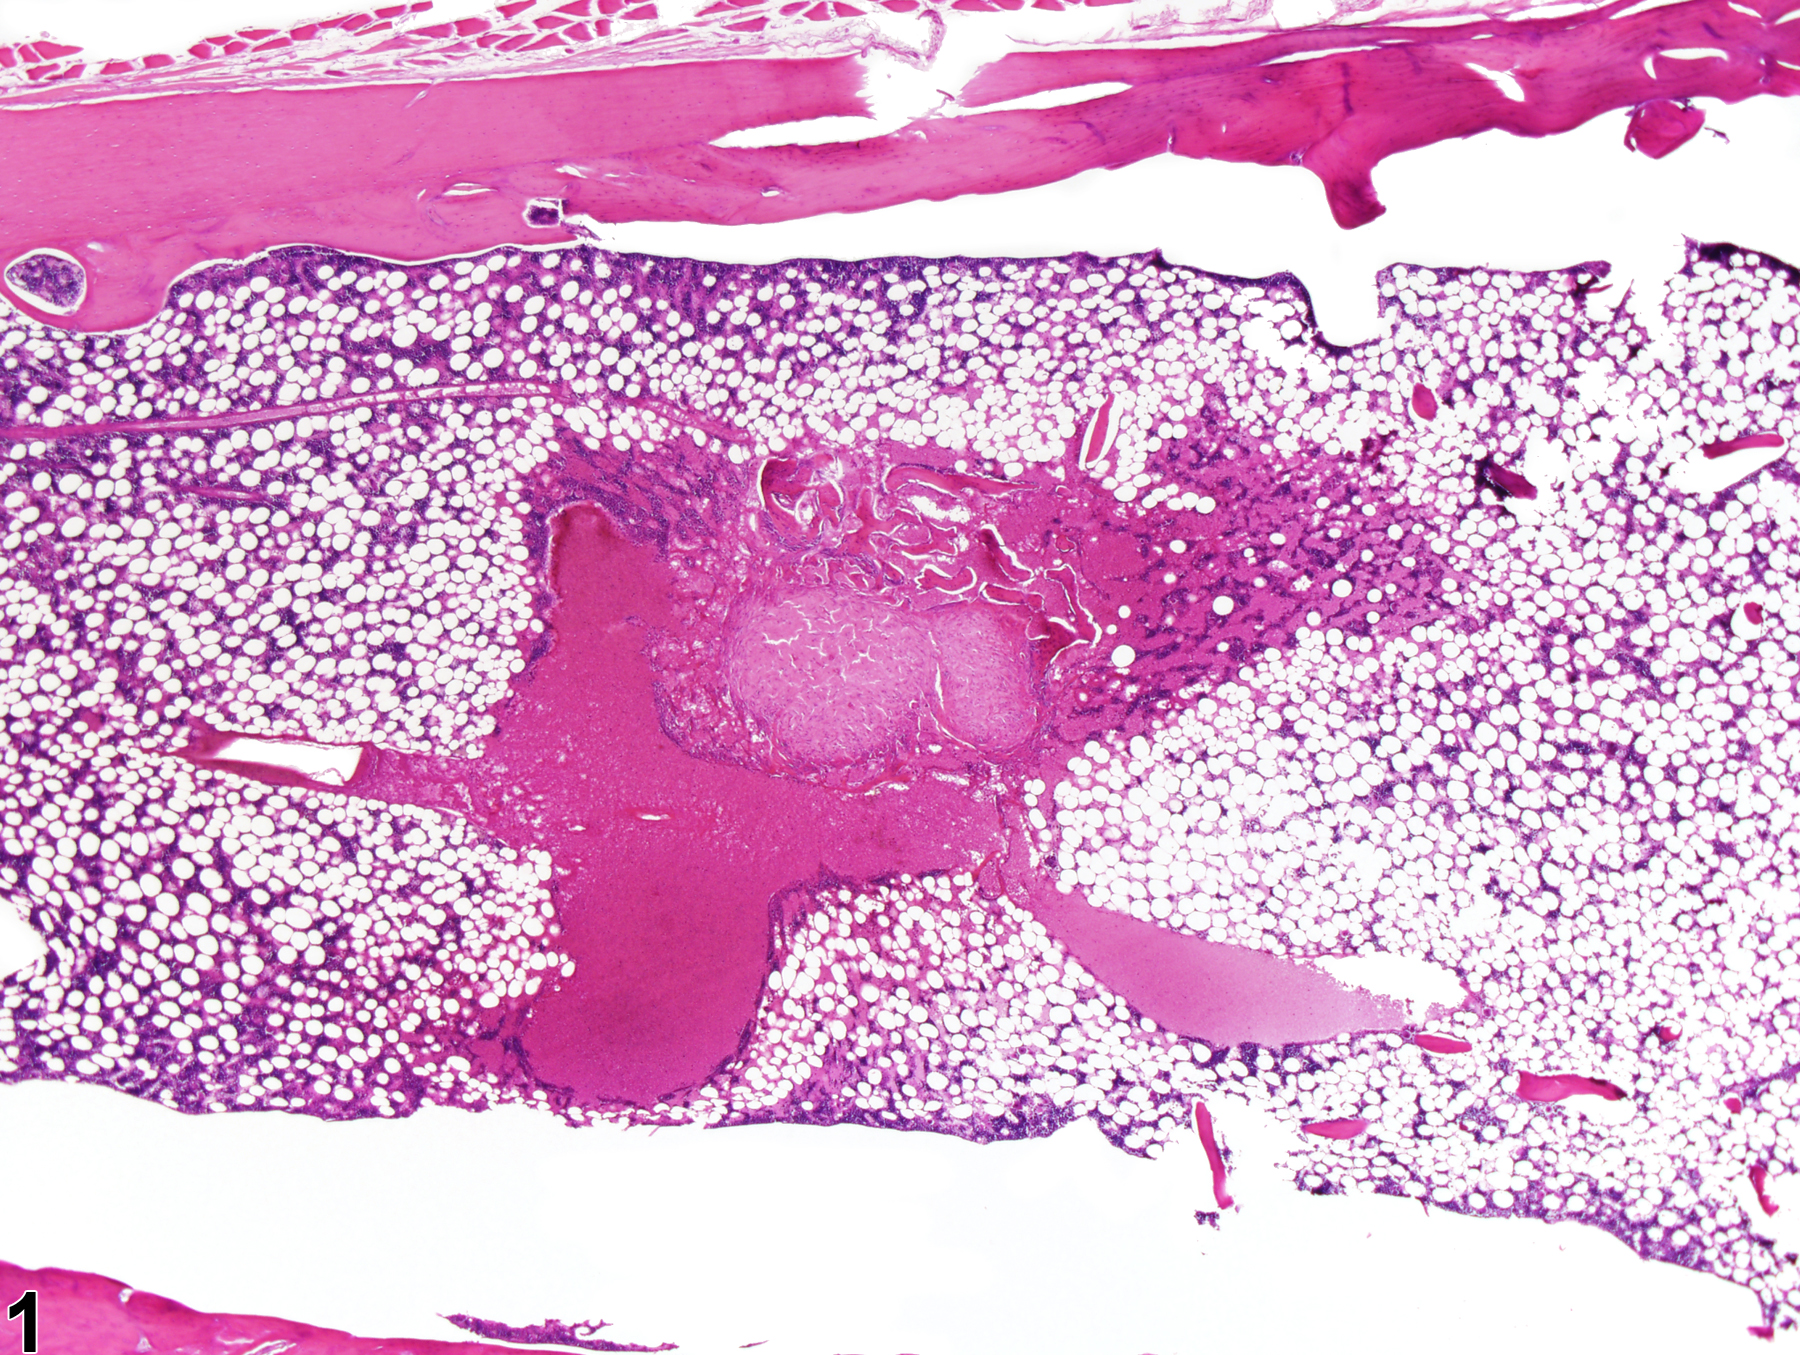 Image of fibrosis in the bone marrow from a male F344/N rat in a chronic study